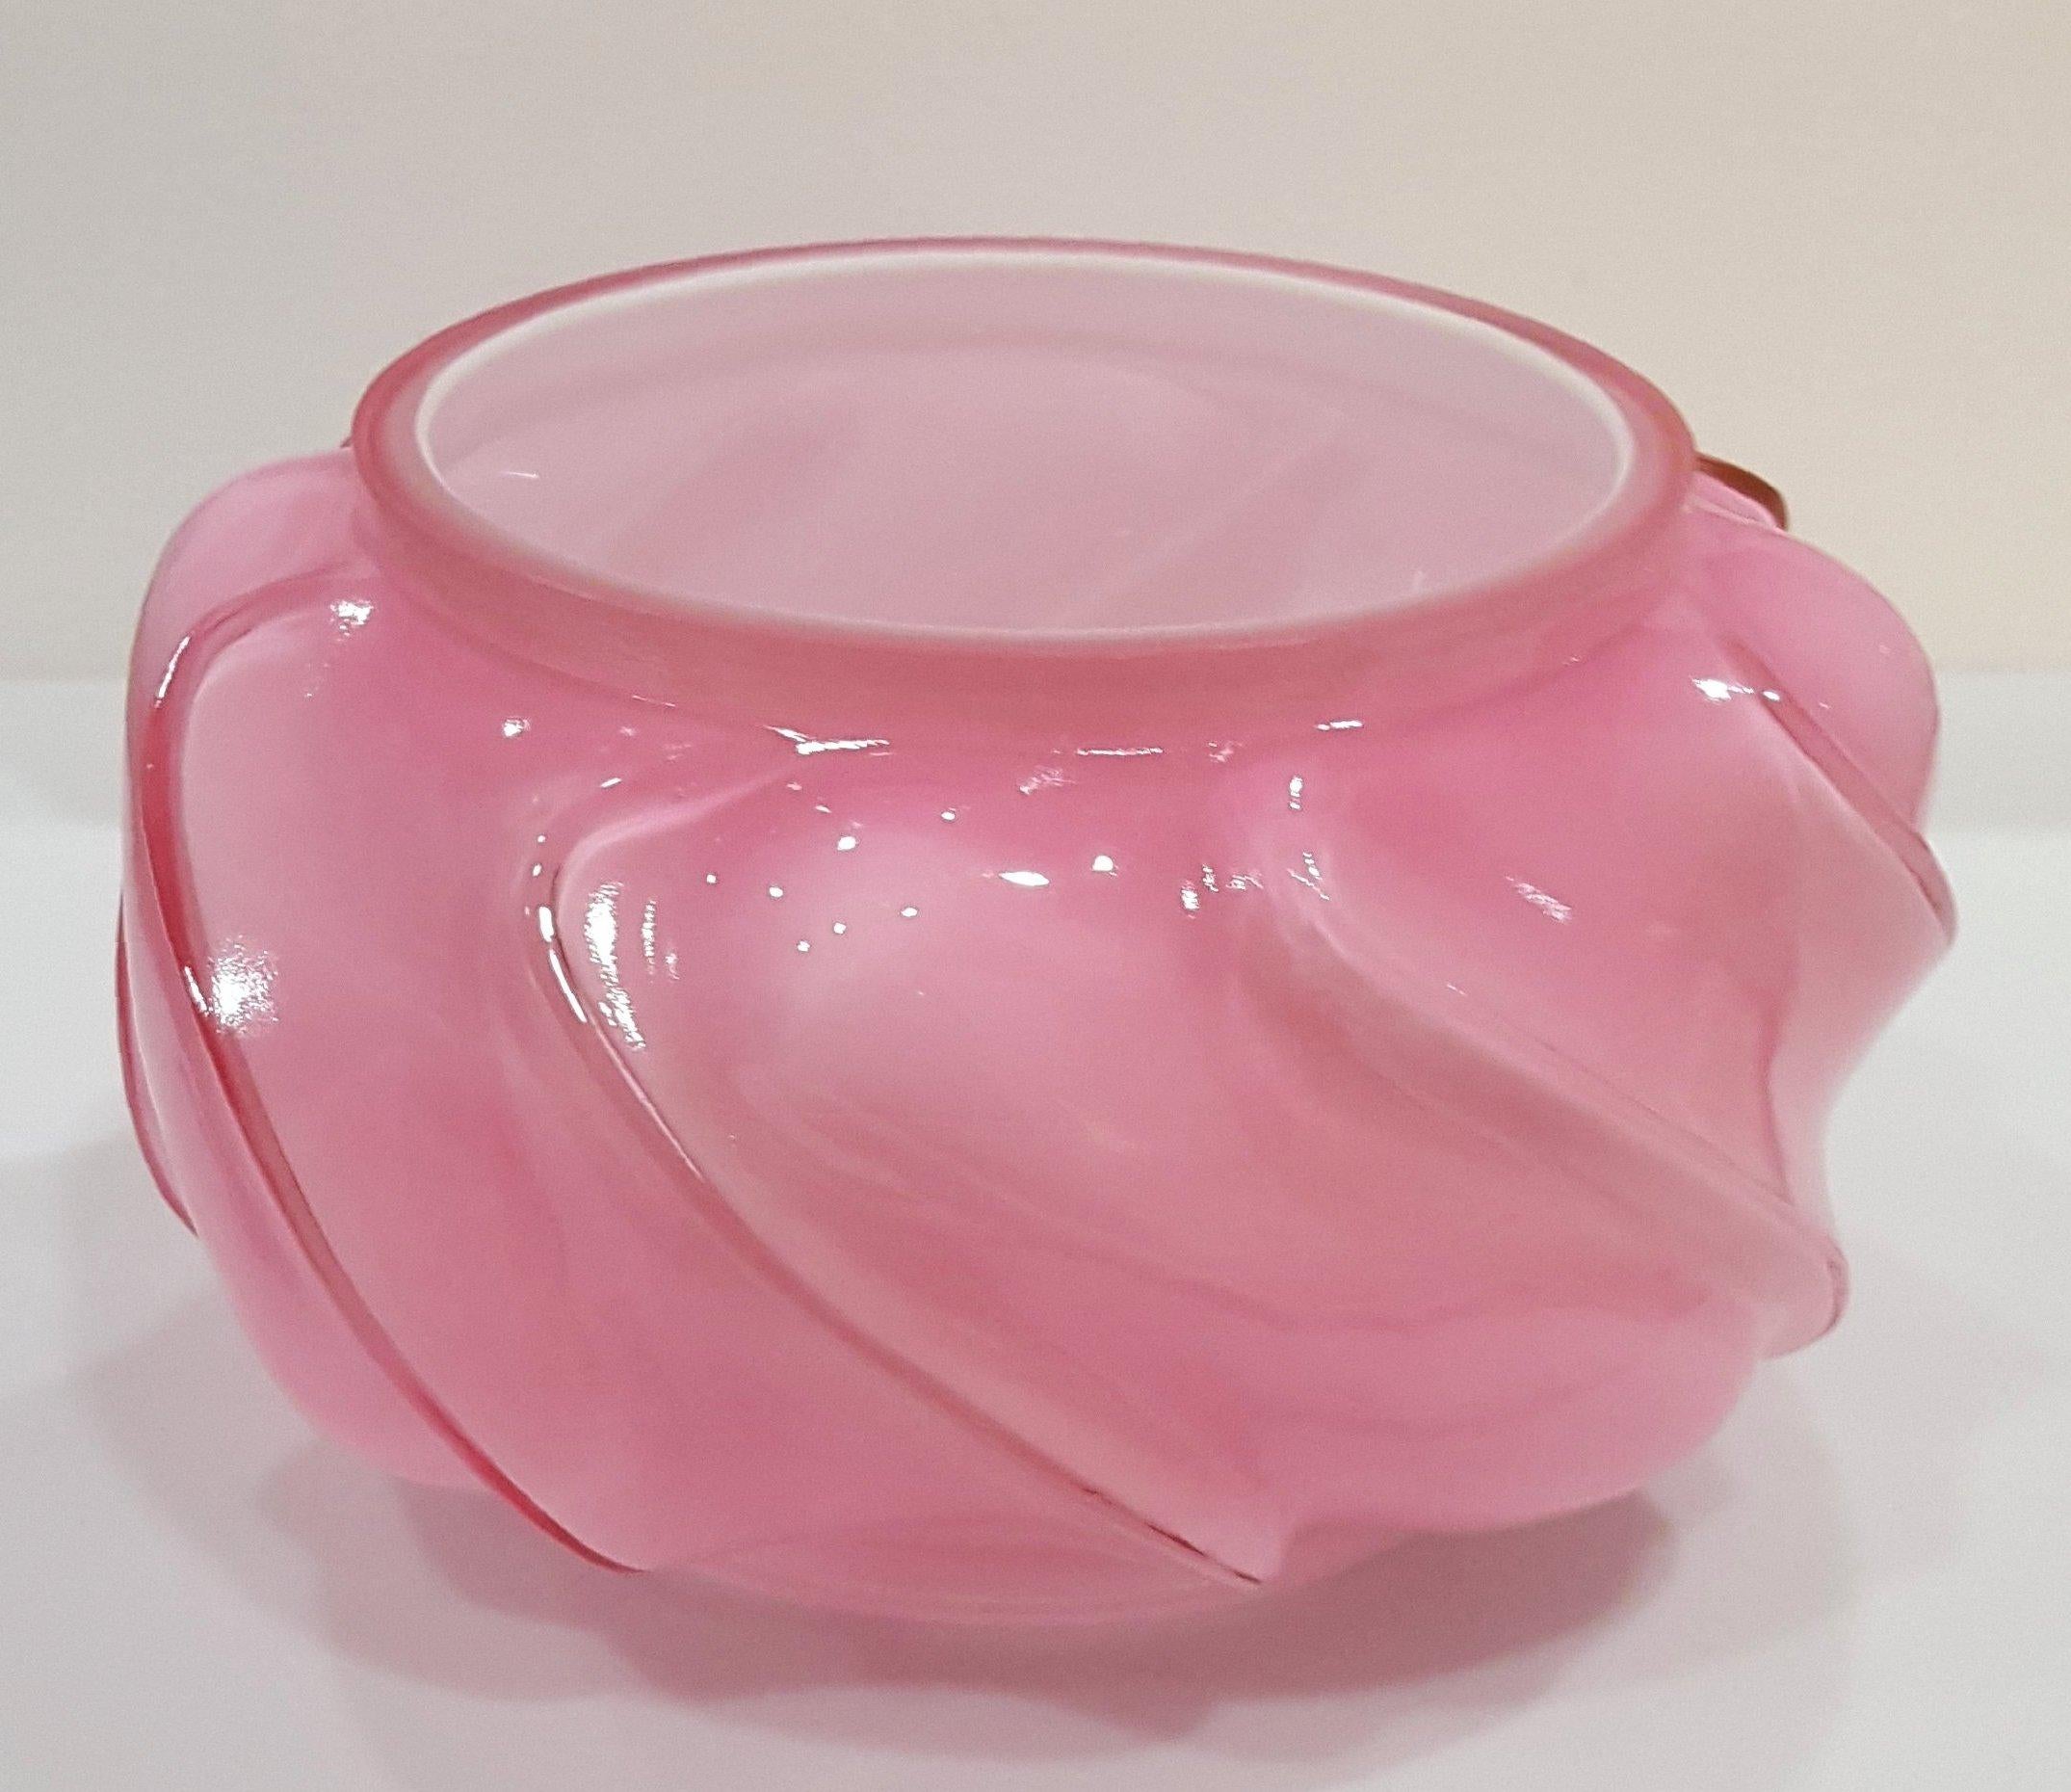 Fenton cased glass bowl, beautiful pink exterior, white interior. The sweeping diagonal ridges give it even more character.
This would make a nice gift for vintage glass lovers, in our opinion.
6 x 4 inches apx
Very nice vintage